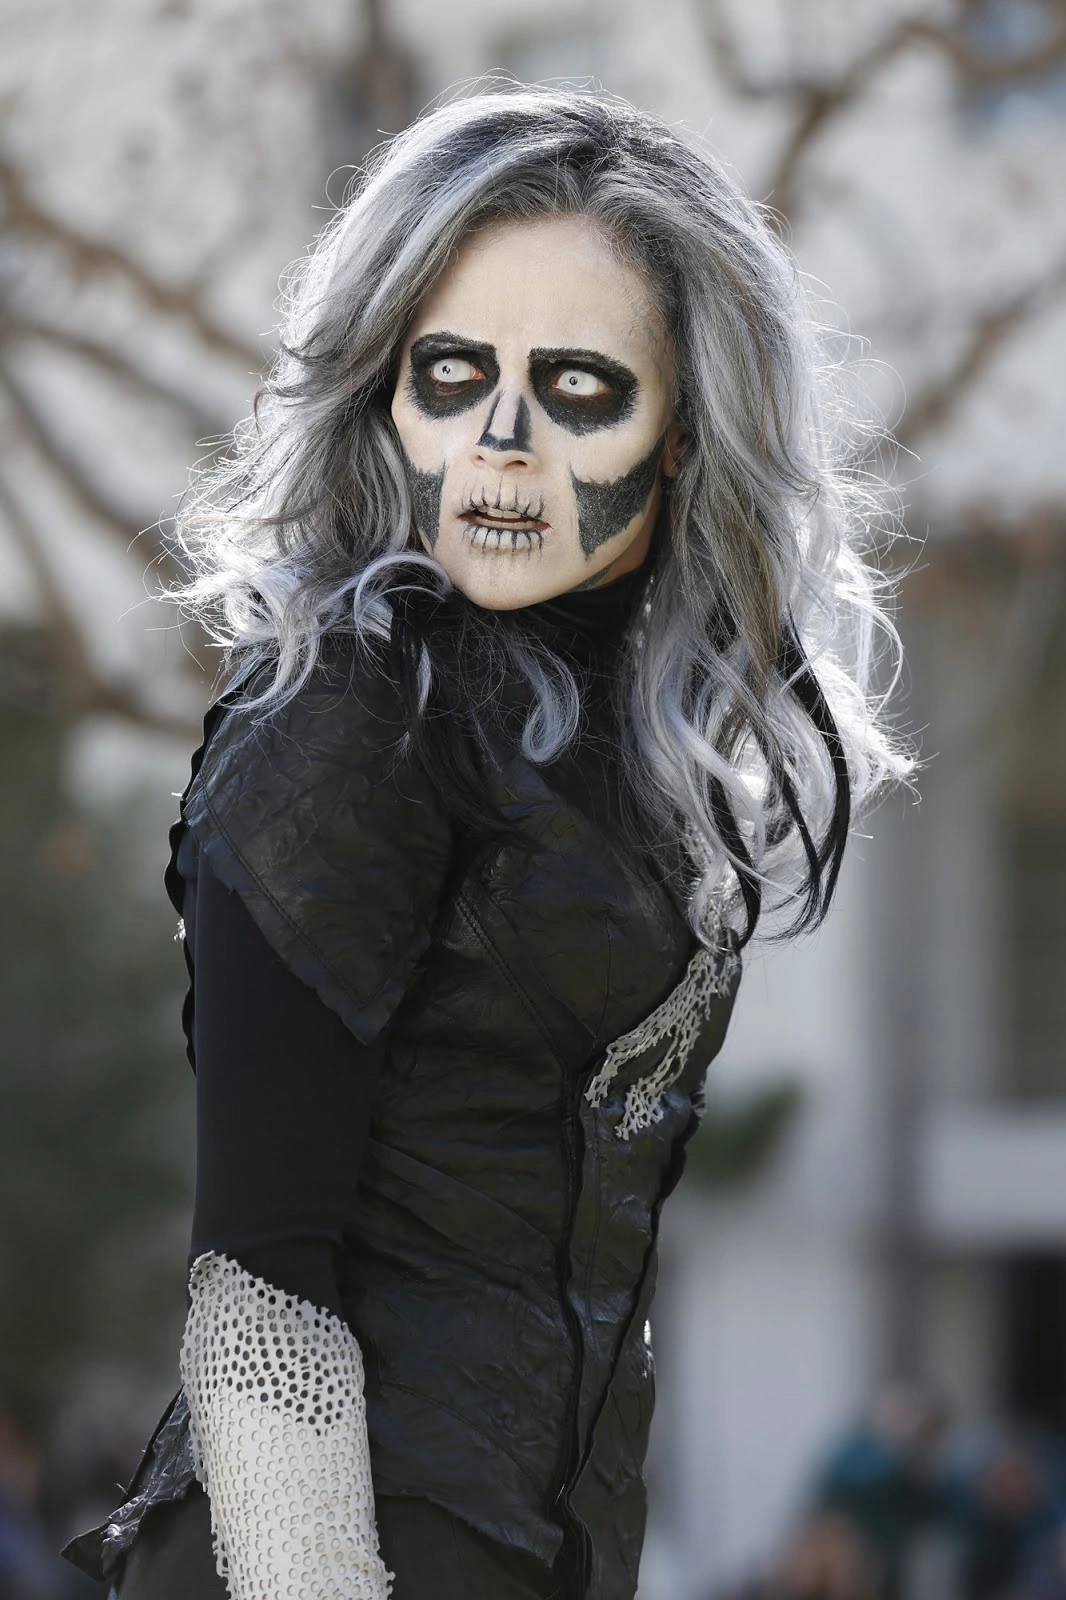 Her extensive role in the Supergirl TV series - Silver Banshee in Arrowverse